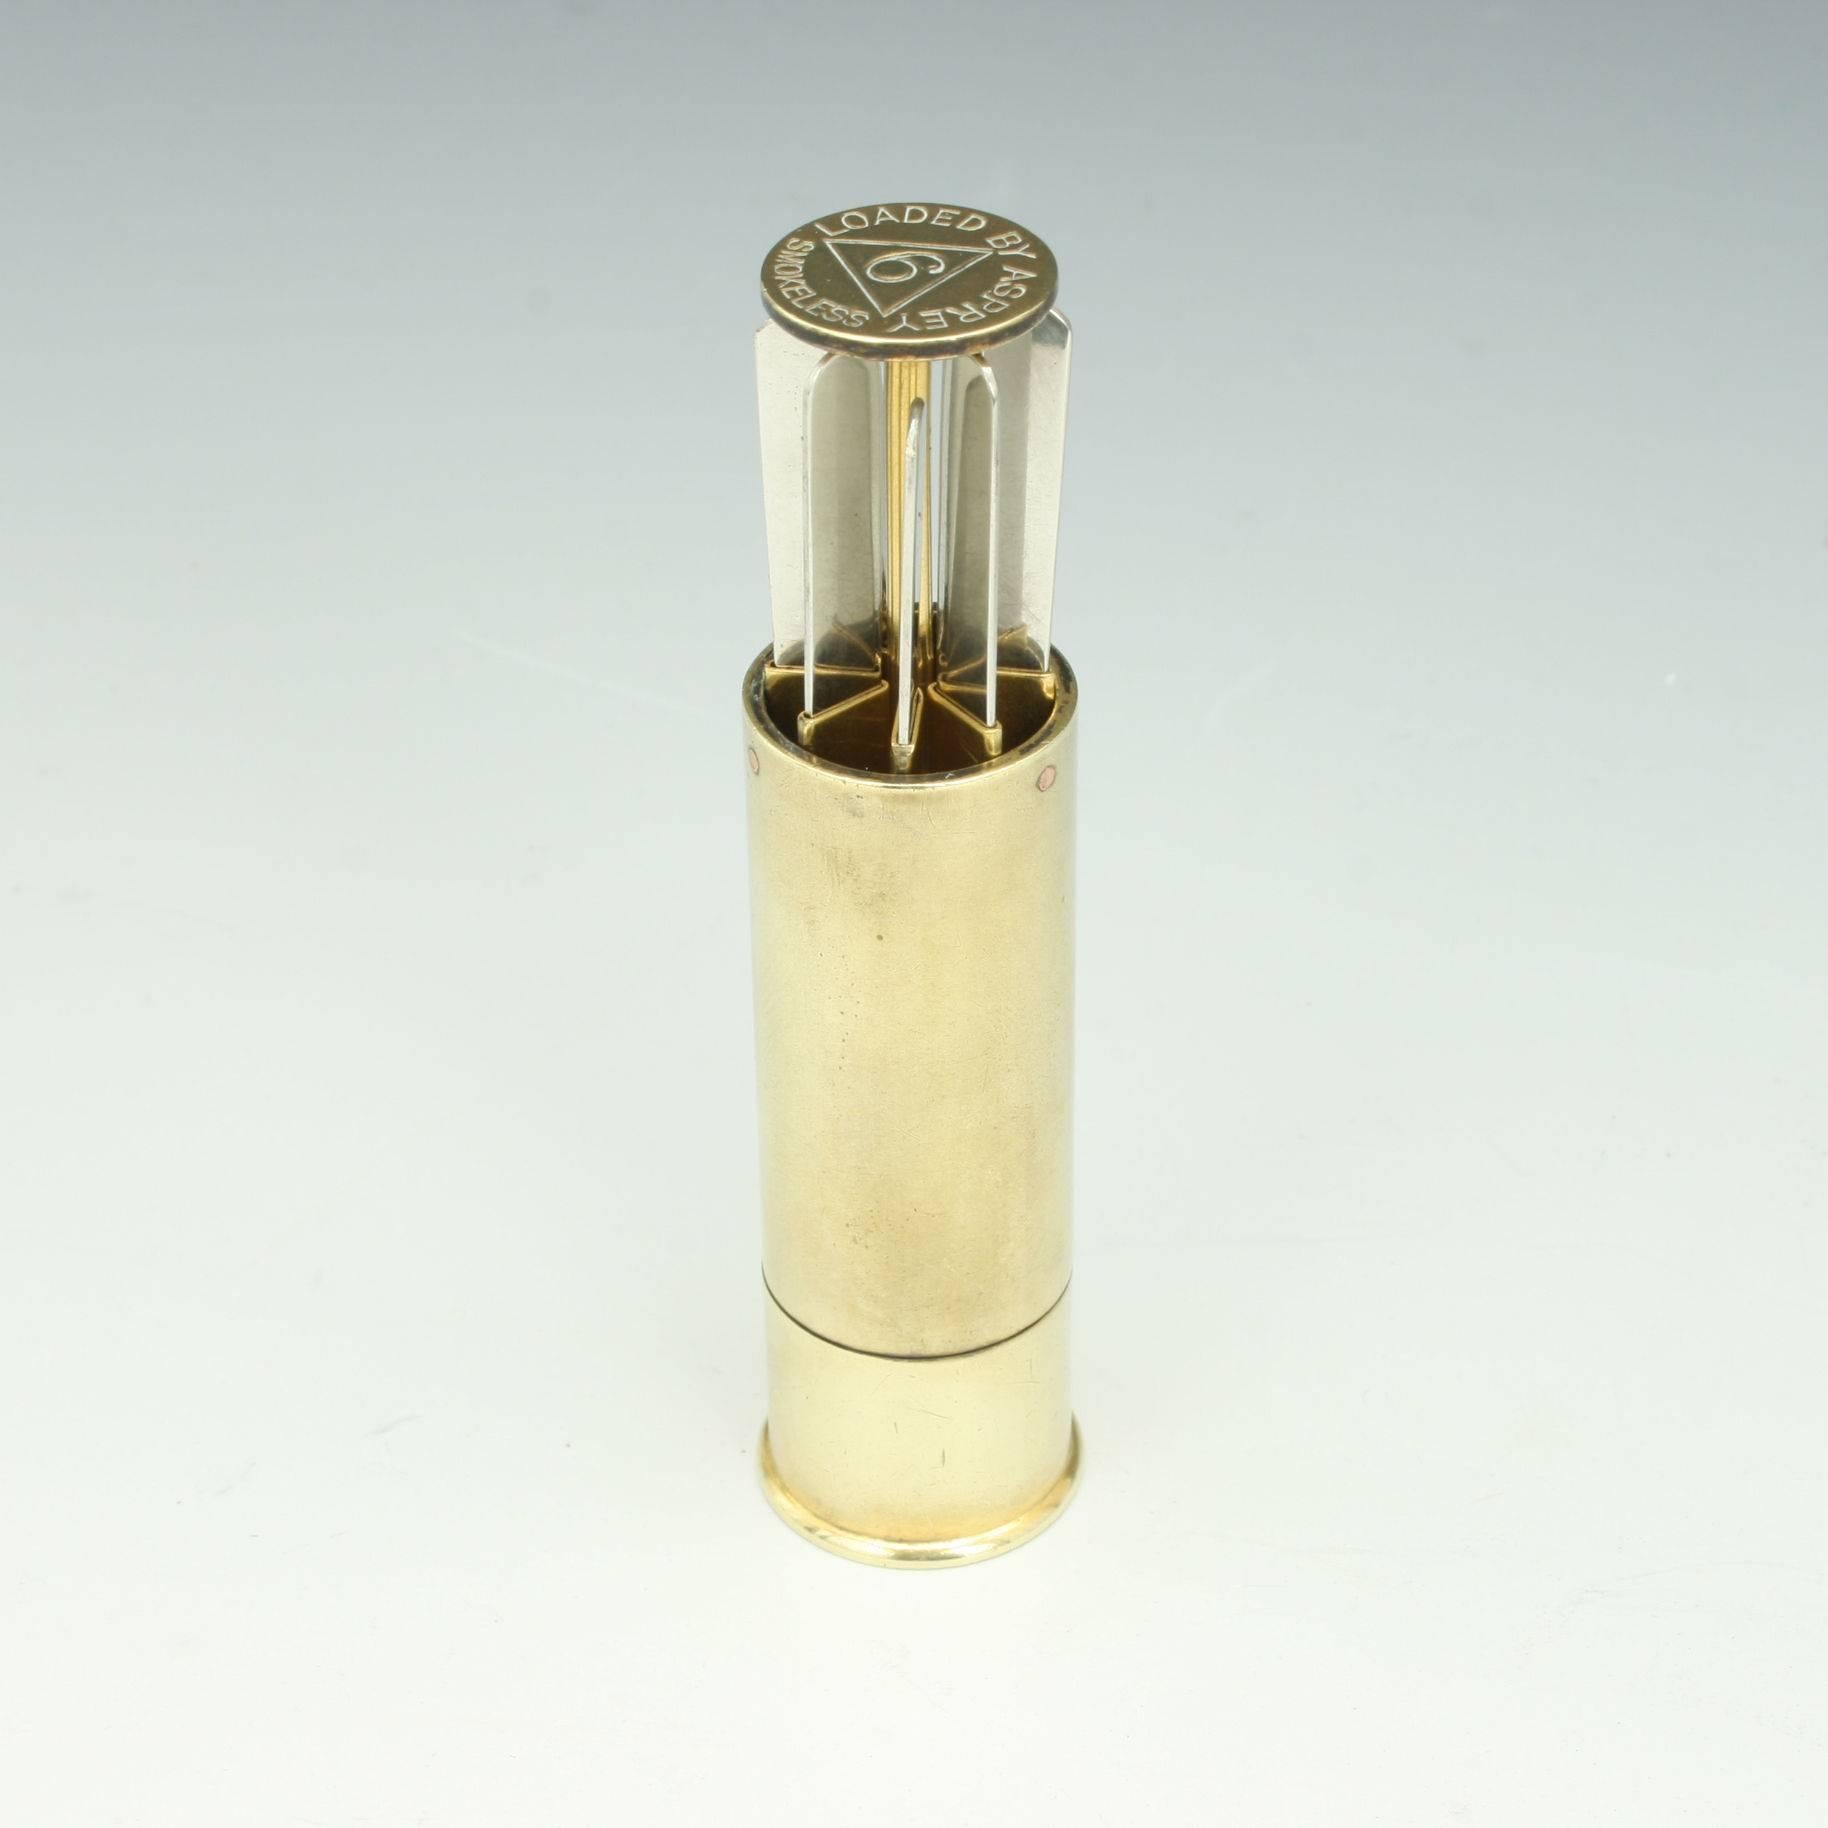 Vintage Asprey's cartridge placefinder 
A well crafted and engineered 1930s shooting place finder or butt marker in the shape of a 12 bore shotgun cartridge. The cartridge is made of brass/gun metal by Asprey of London. When twisting the cartridge